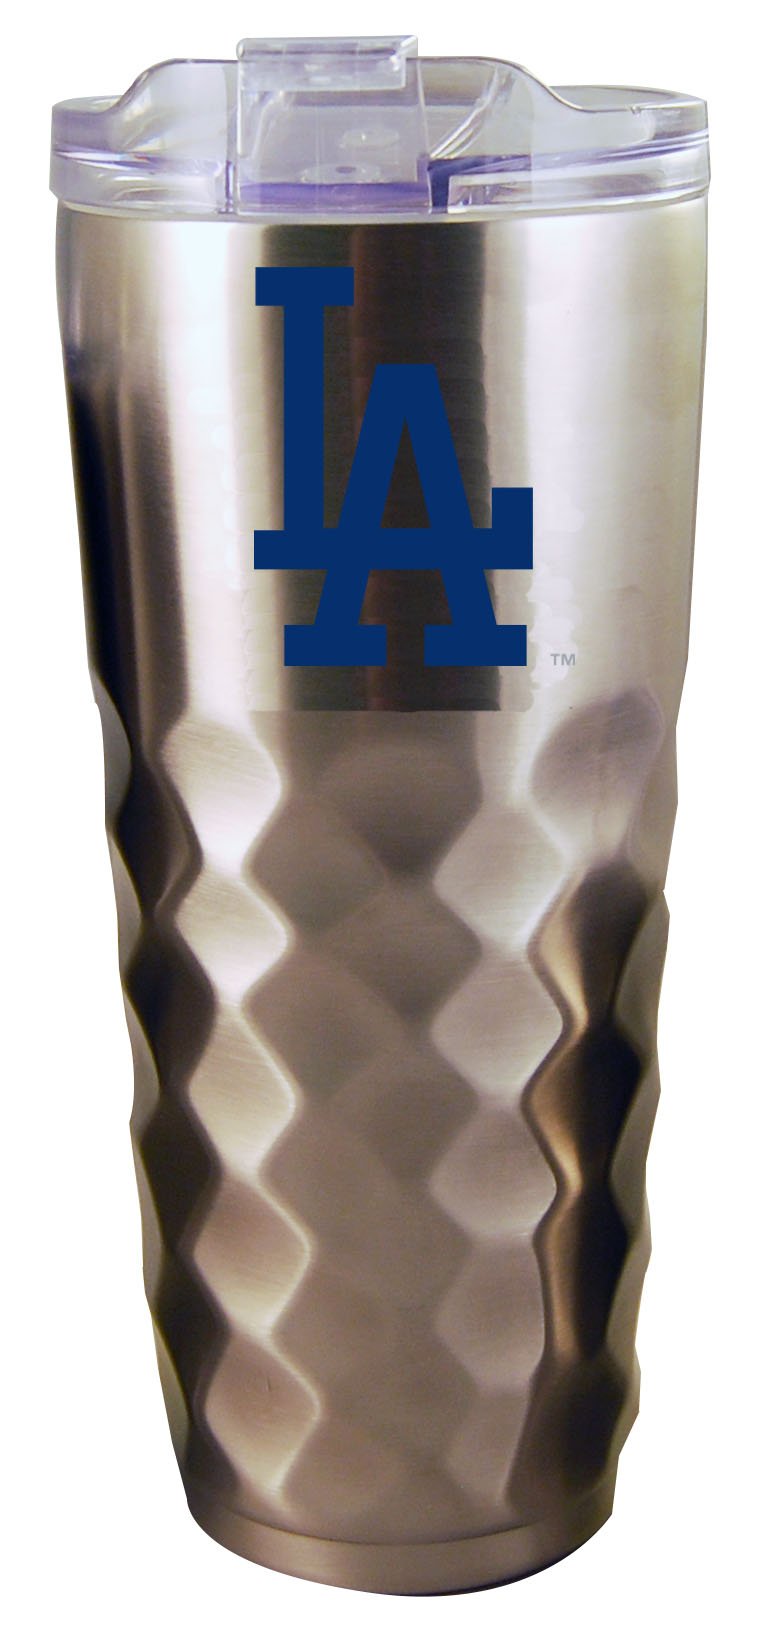 32OZ Stainless Diamond Tumbler - Los Angeles Dodgers
CurrentProduct, Drink, Drinkware_category_All, LAD, Los Angeles Dodgers, MLB, Stainless Steel, Tumbler
The Memory Company